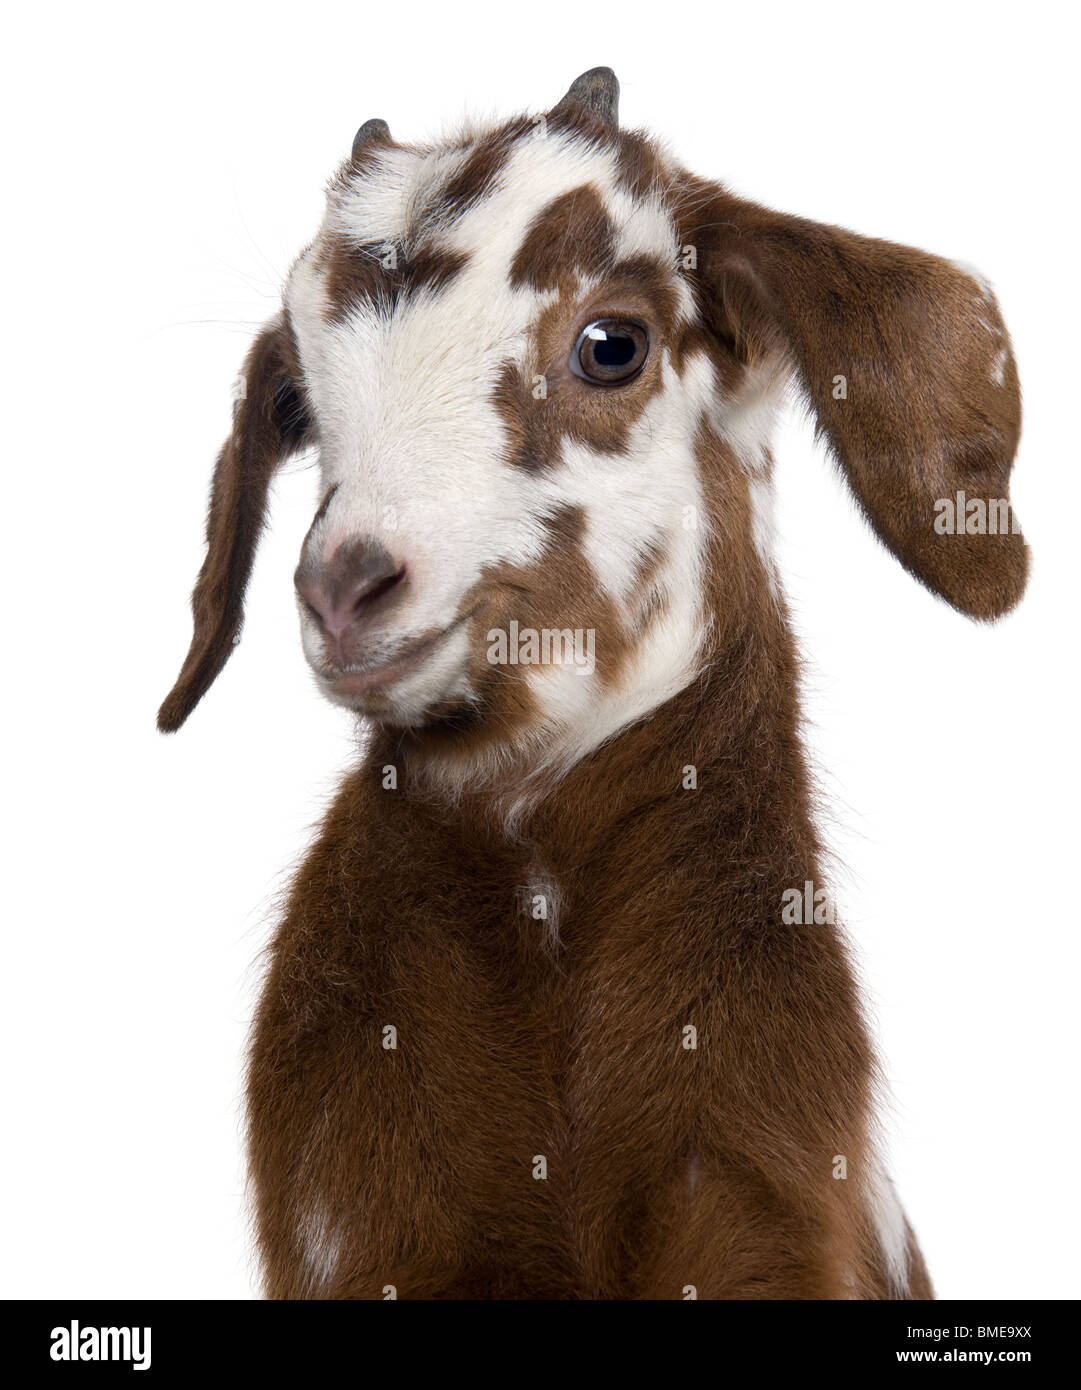 Close-up headshot Rove goat kid, 3 weeks old, in front of white background Stock Photo